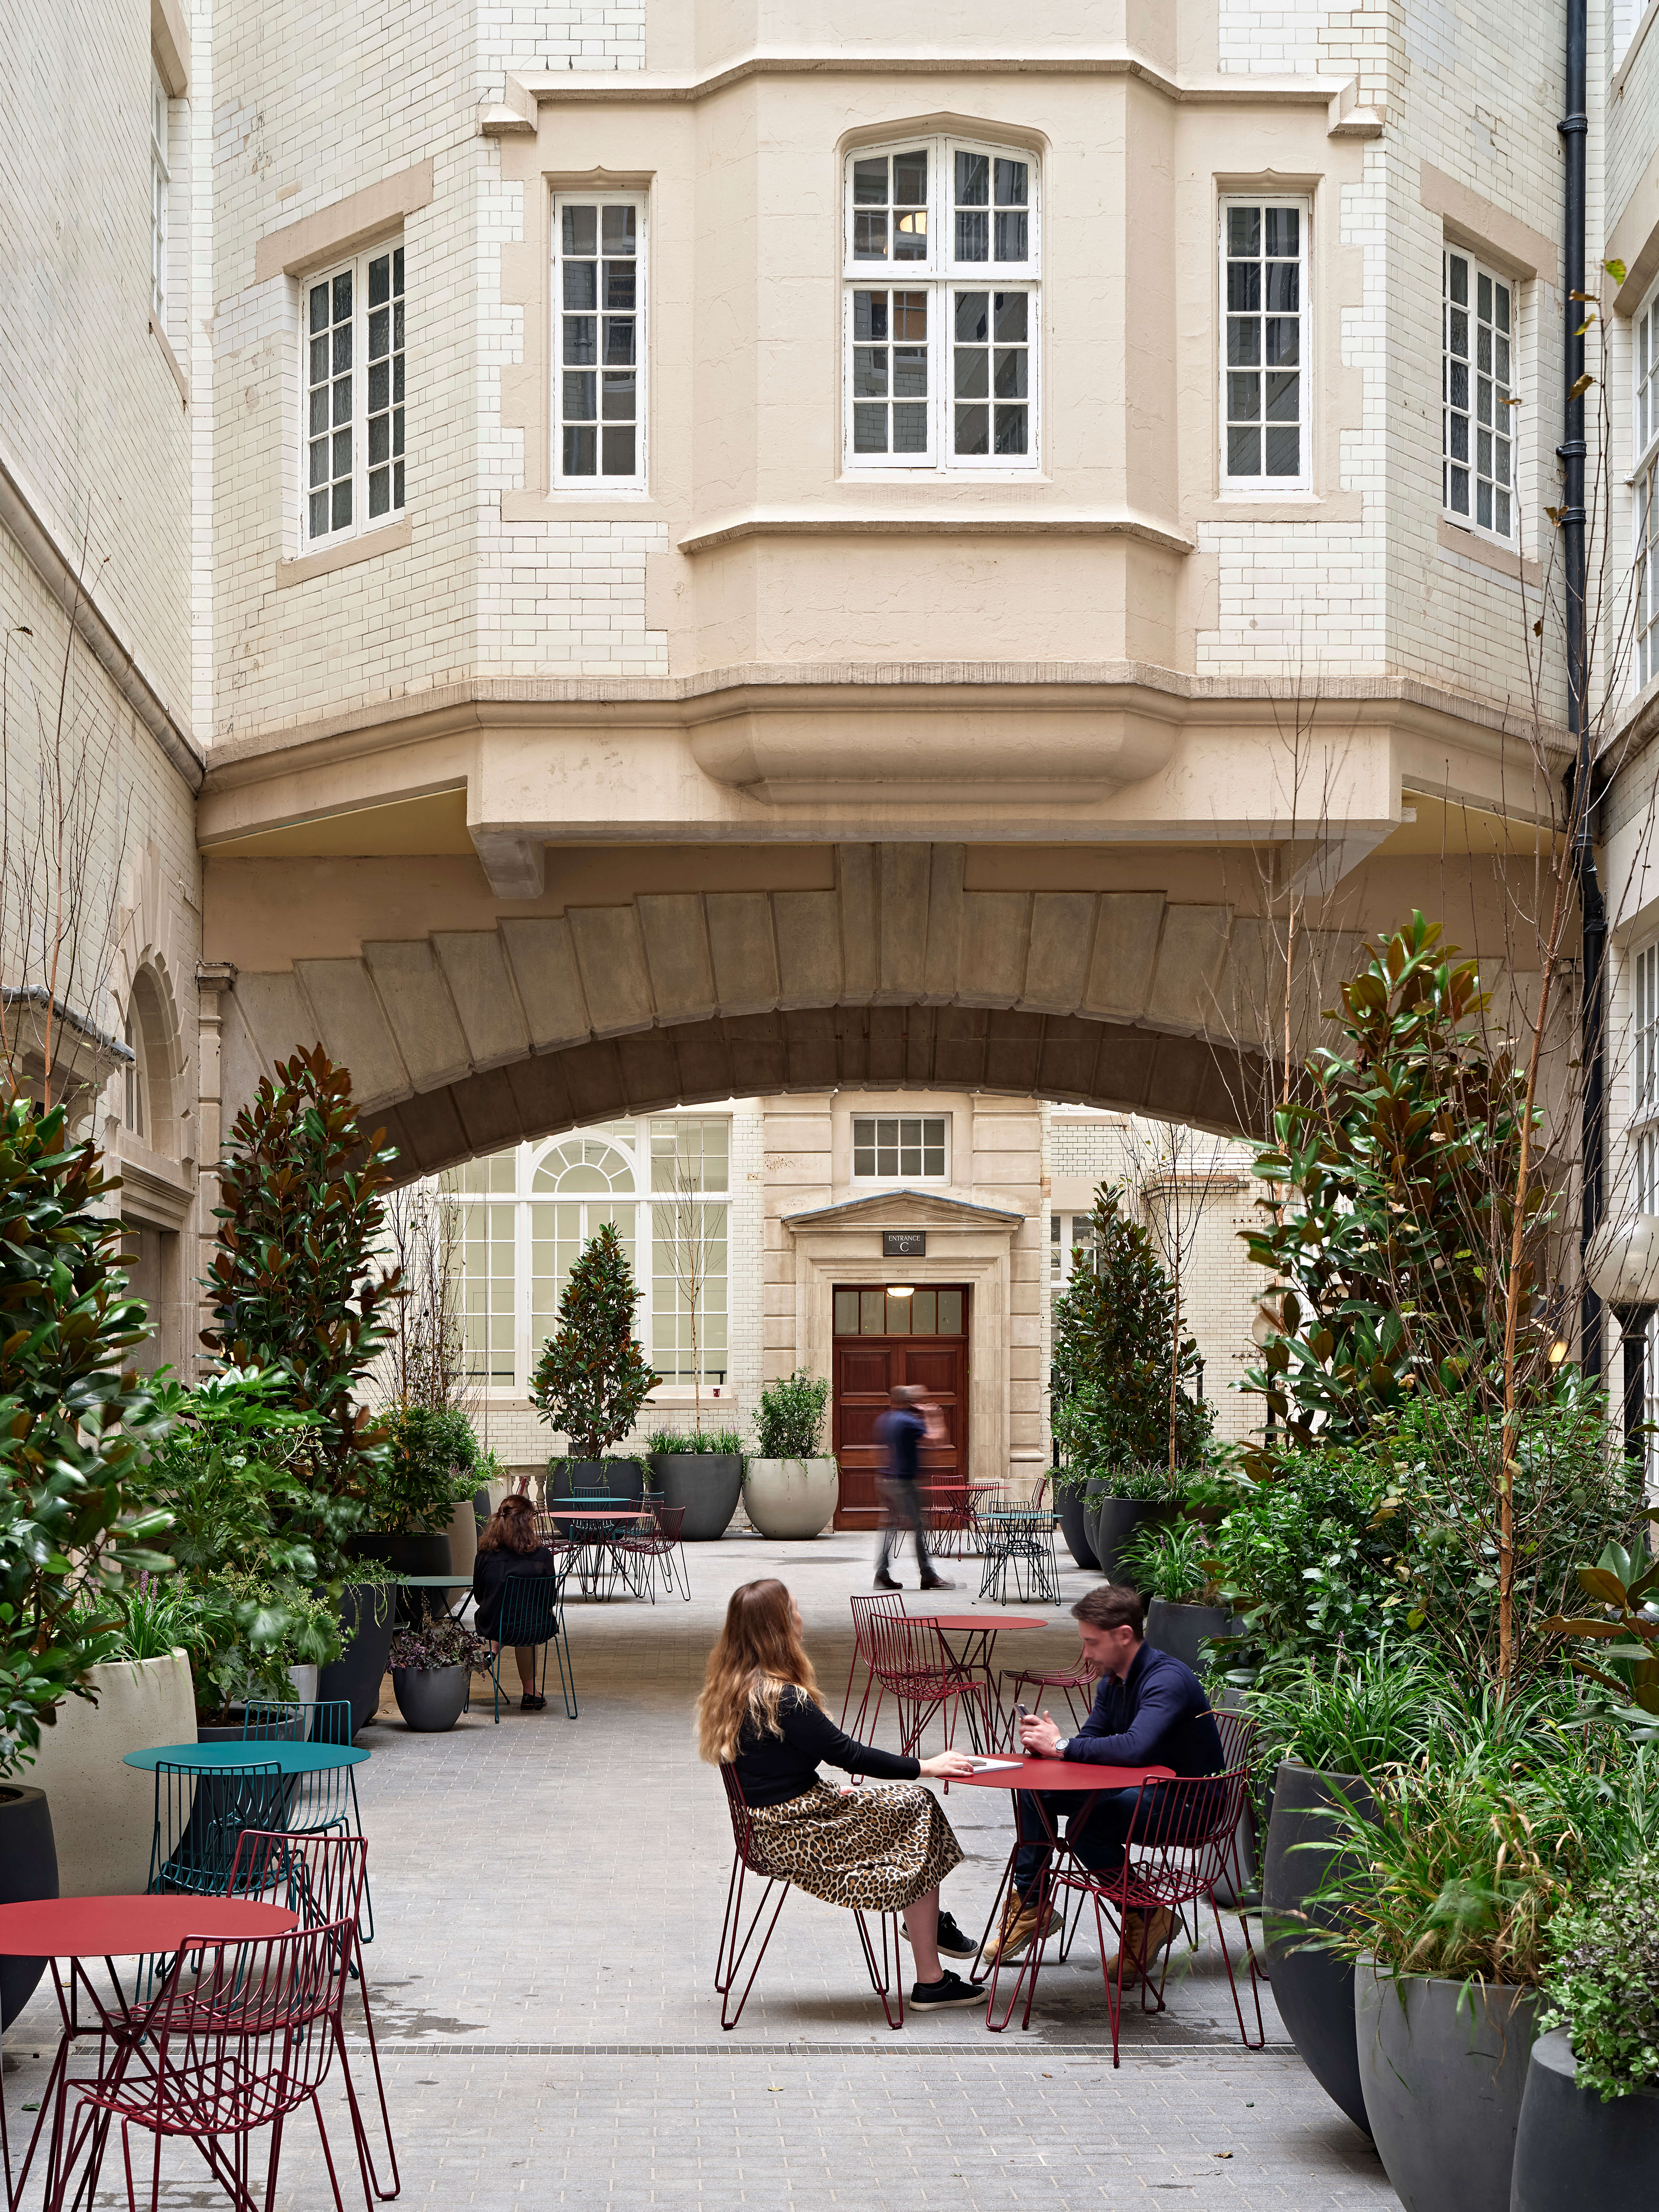 outdoor space with people sitting at tables near and archway